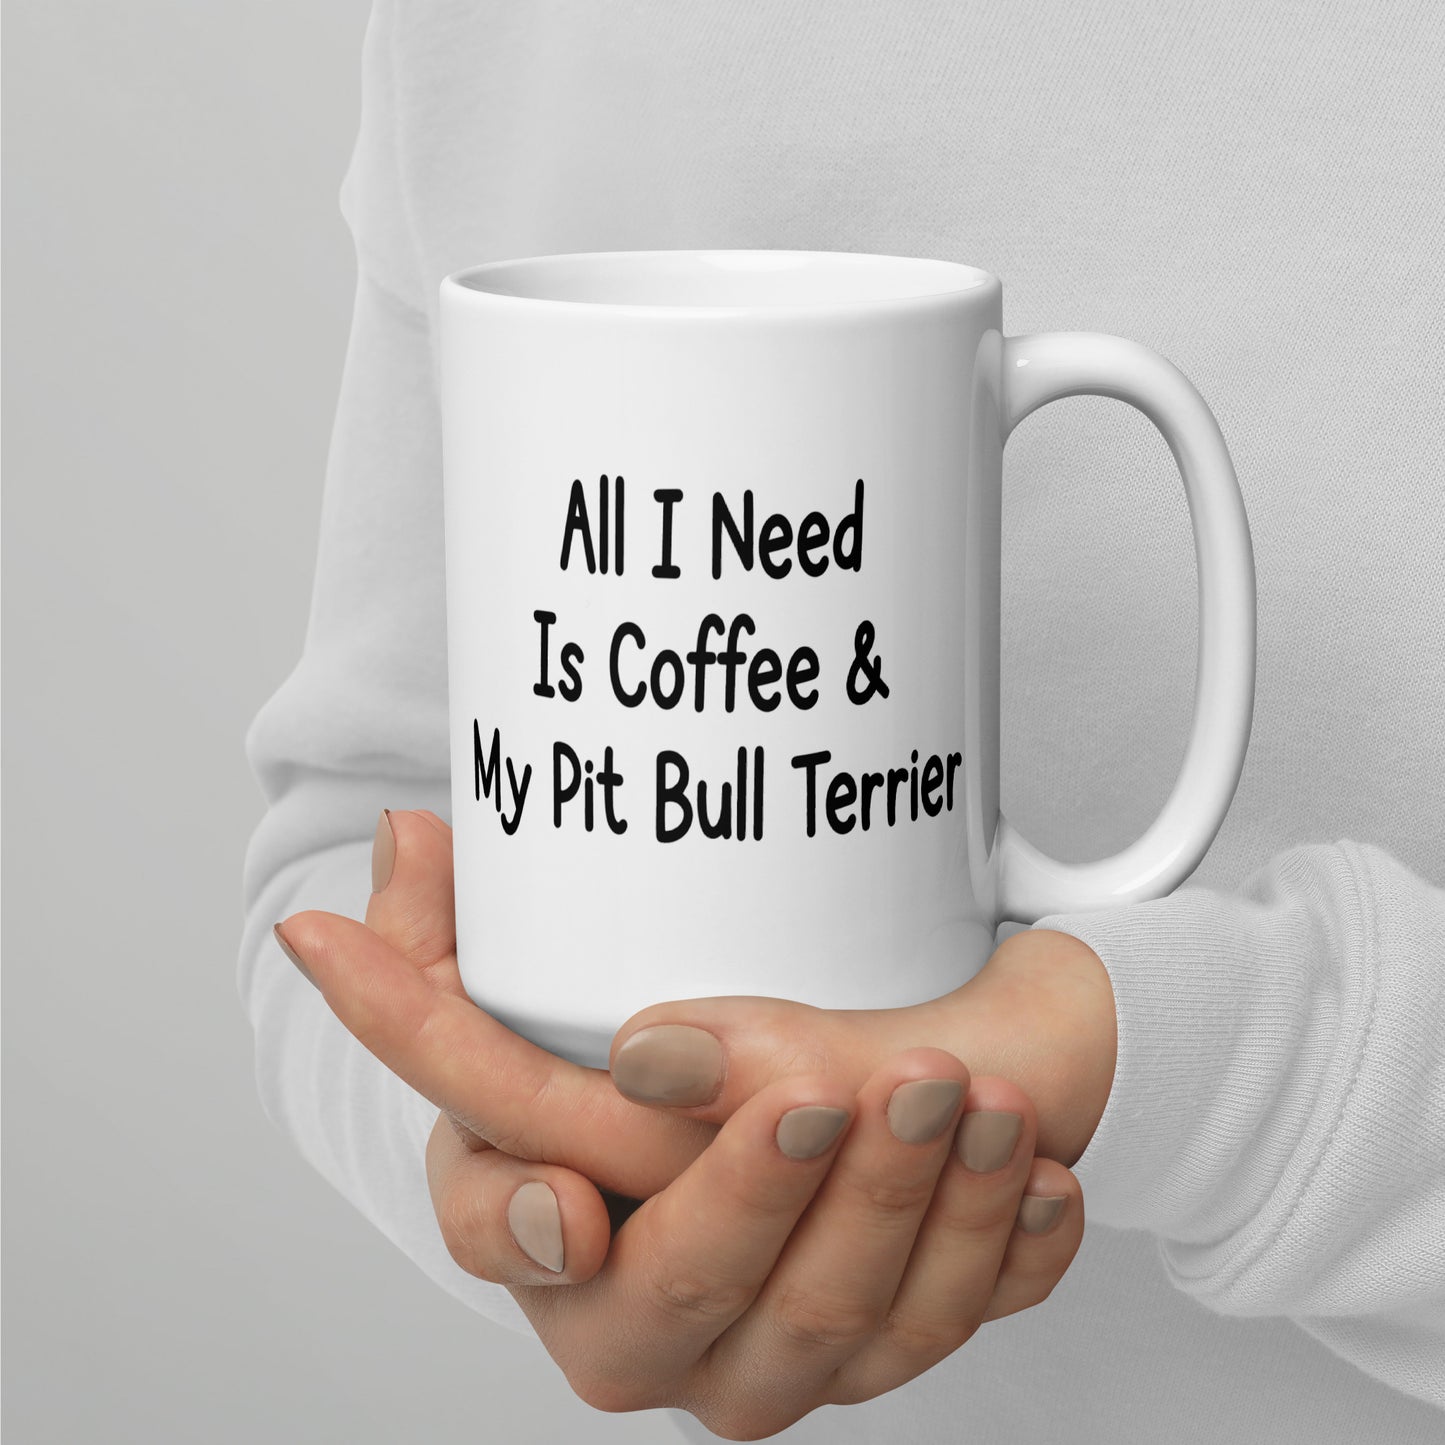 All I need is coffee & my Pit Bull Terrier mug by Dog Artistry.